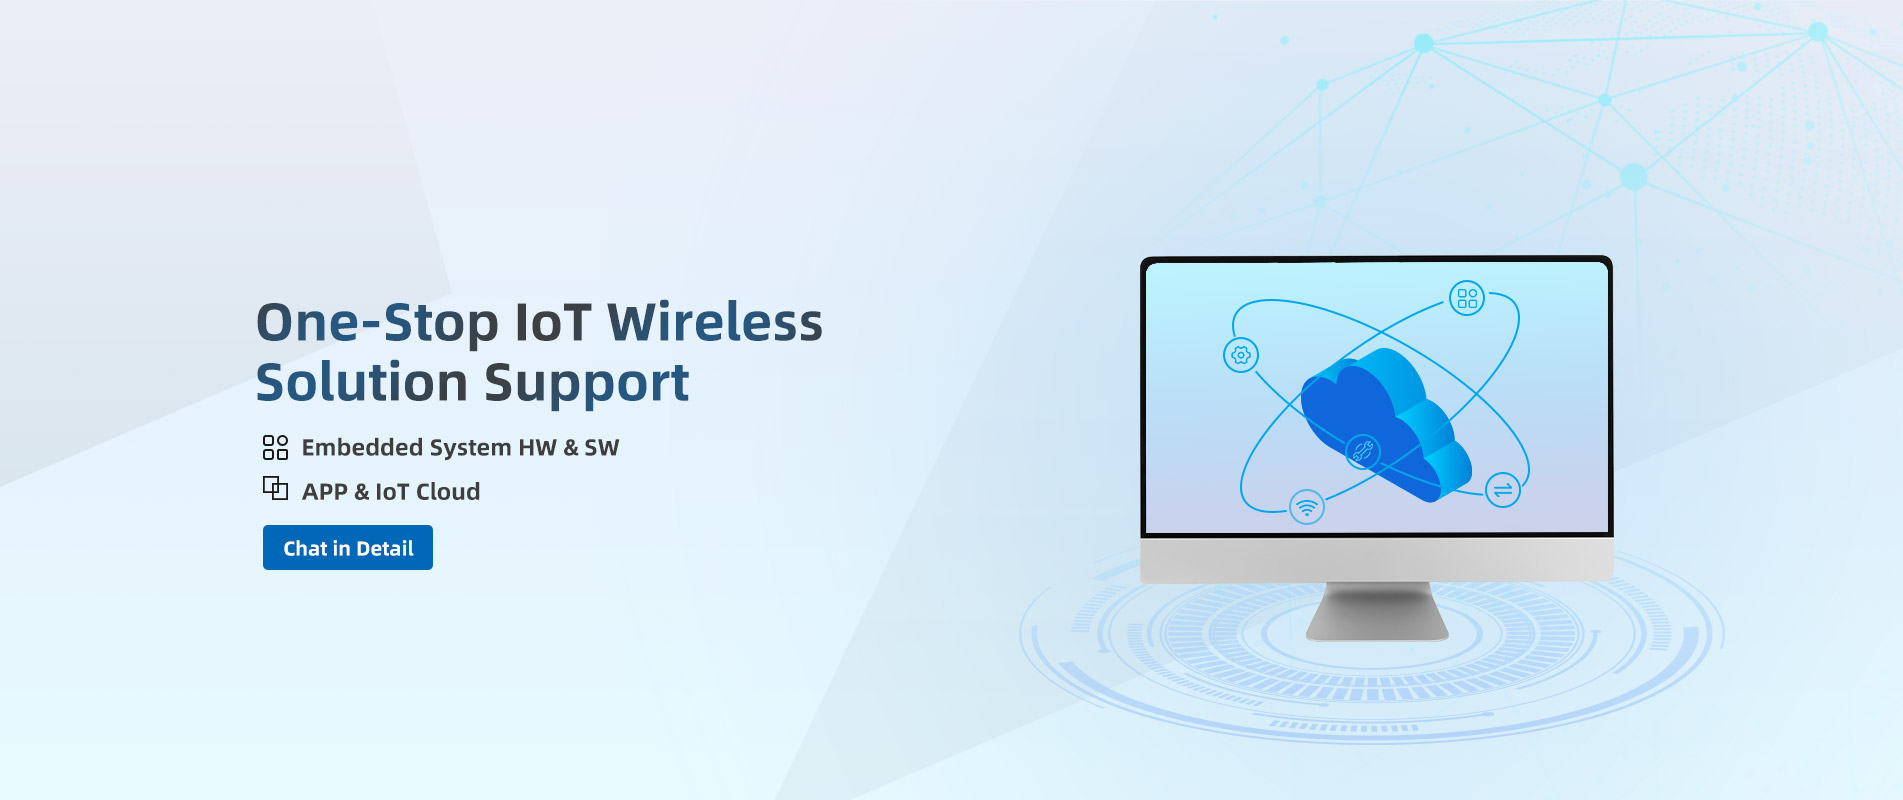 One-Stop IoT Wireless Solution Support